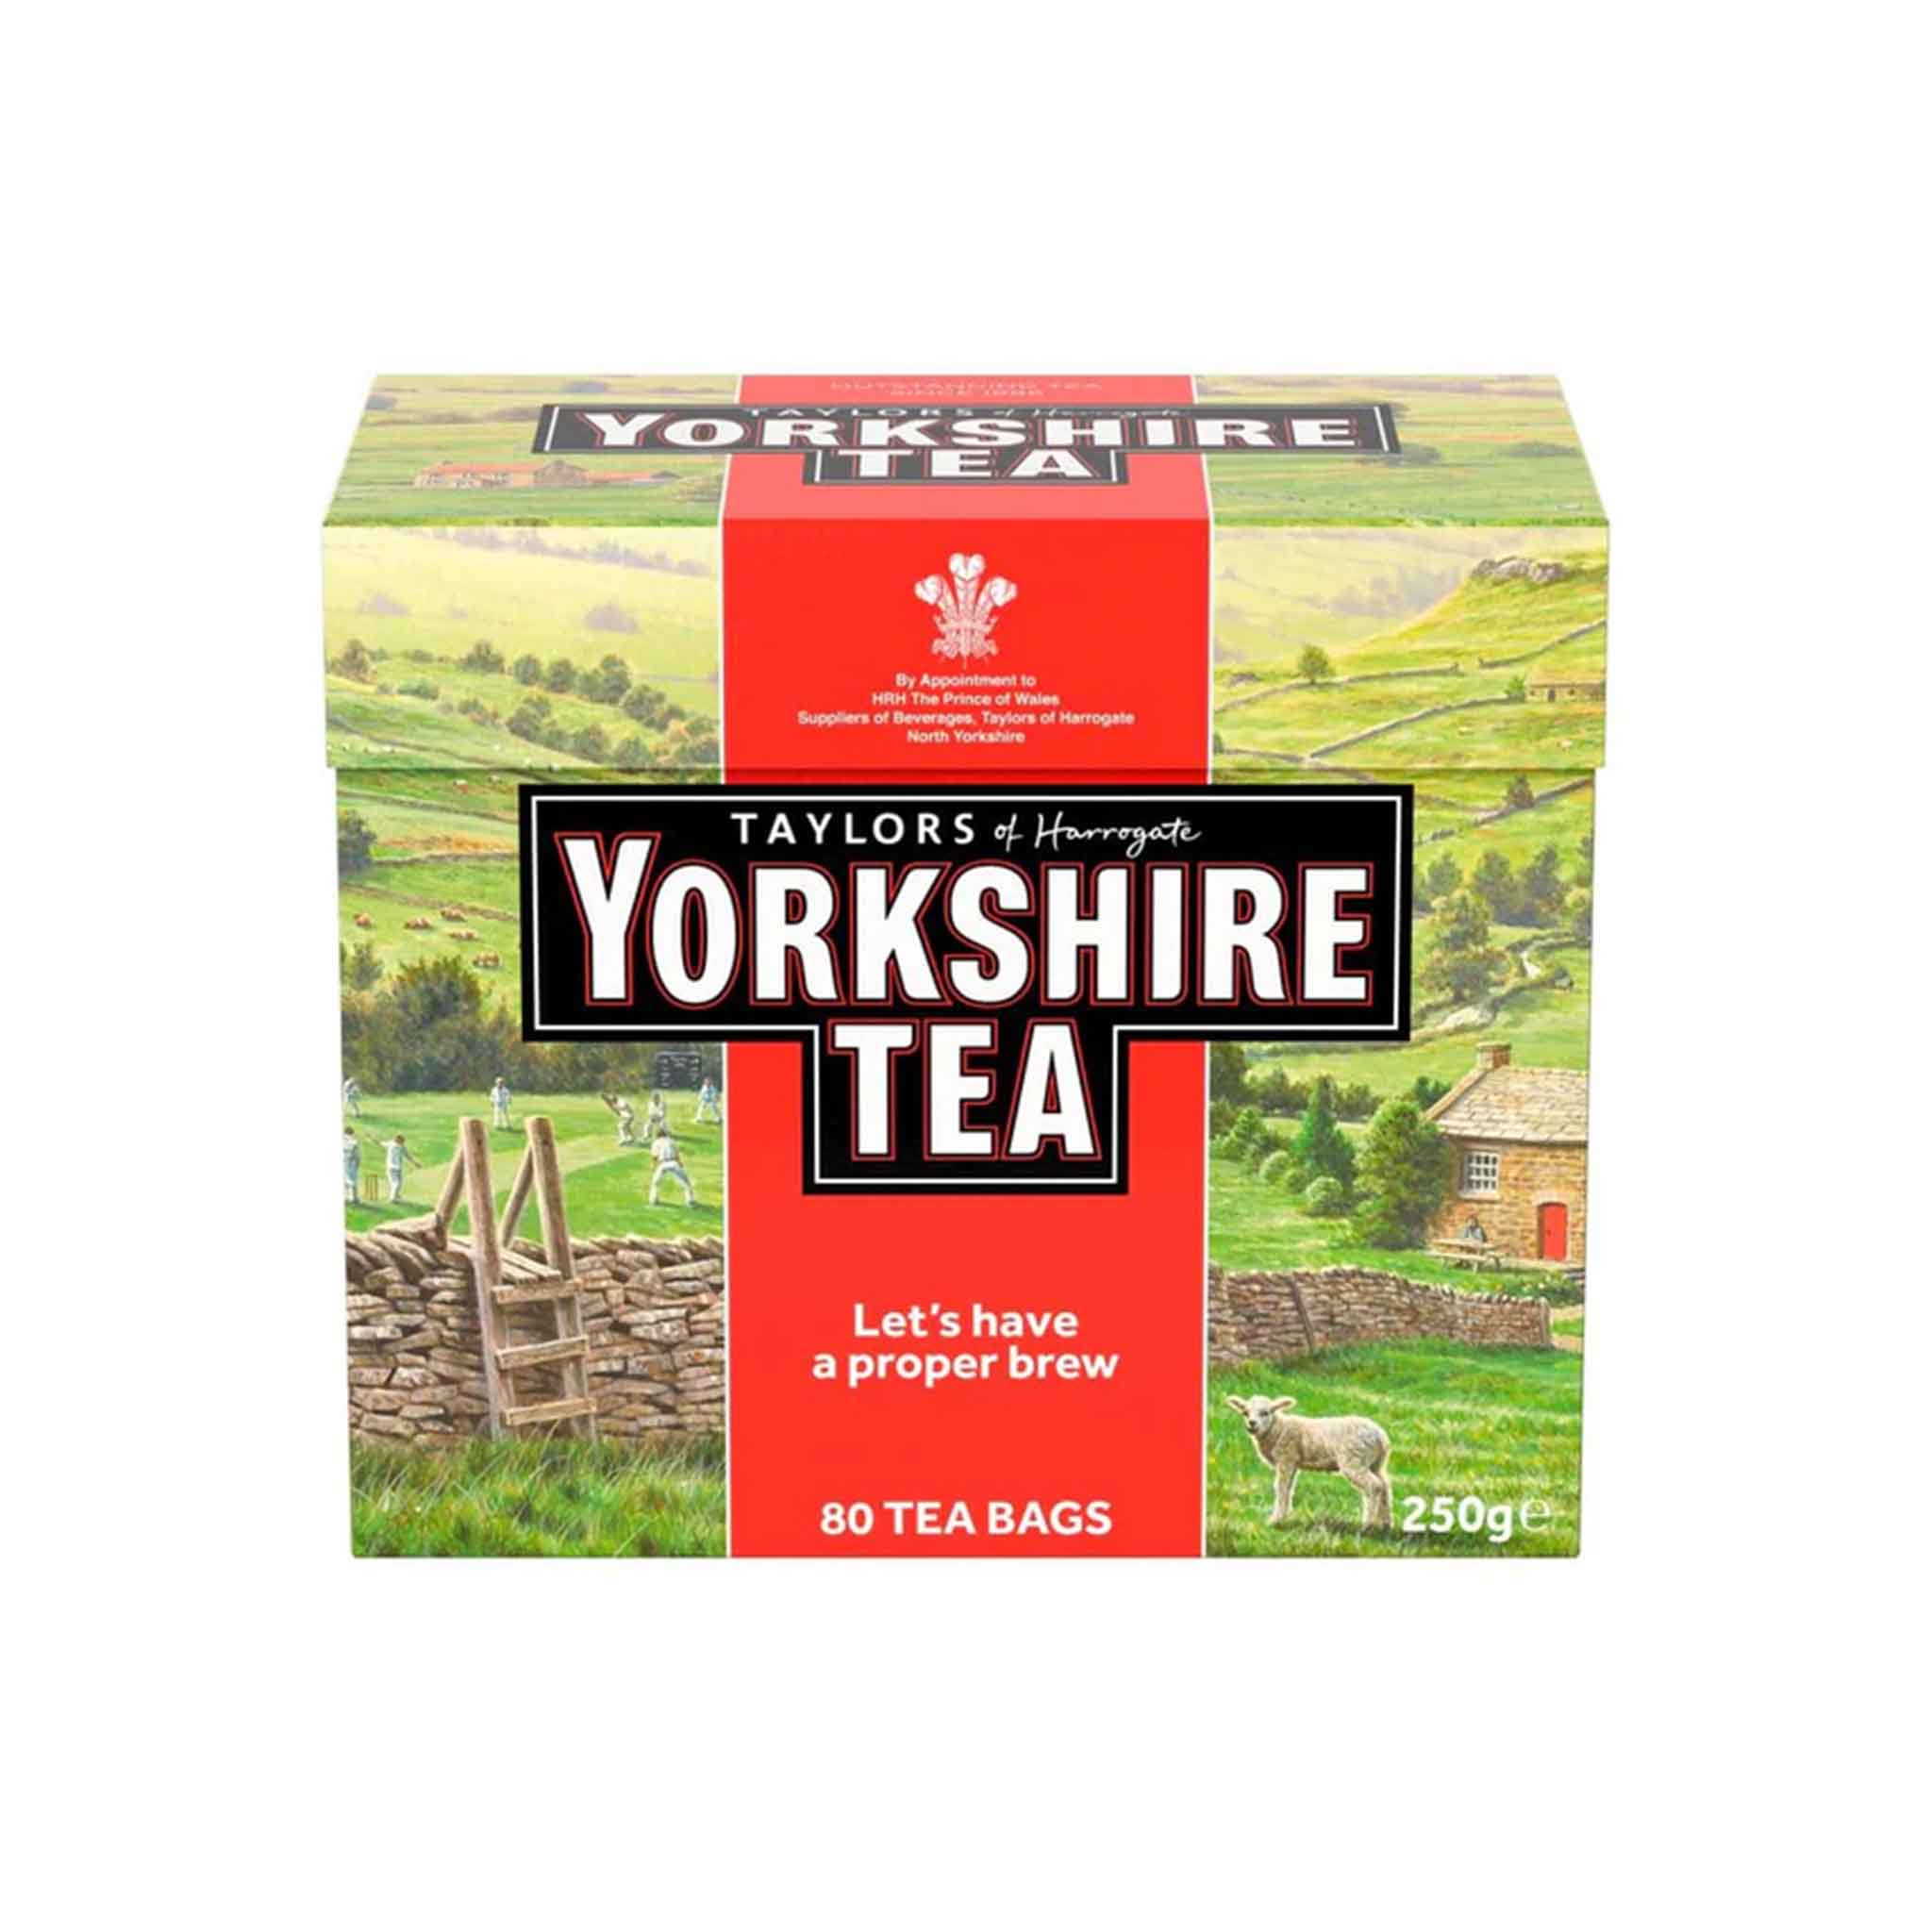 YORKSHIRE TEA BAGS 80 COUNT 250g